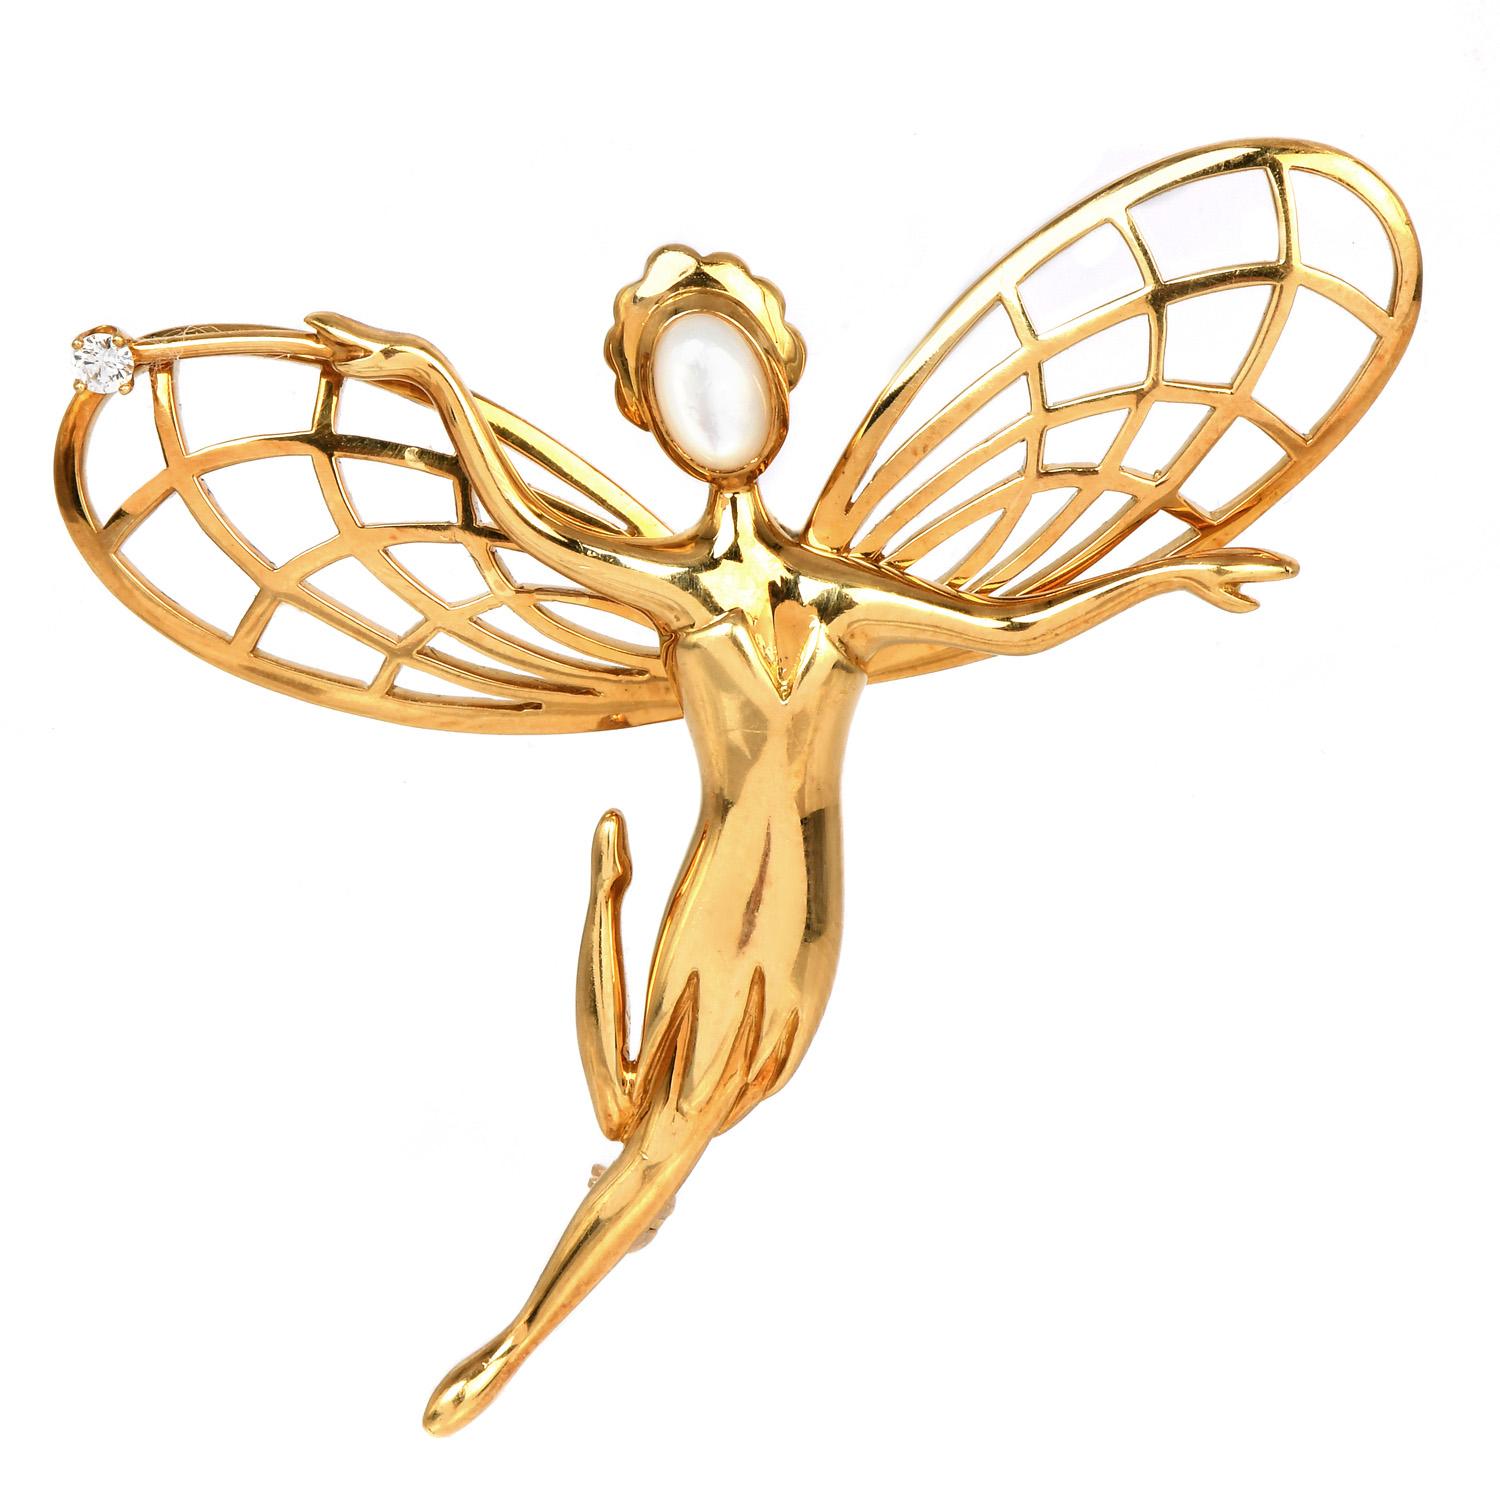 Van Cleef and Arpels 18K yellow gold Fairy Brooch Pin. This VCA,  high Polished gold with Genuine cabochon moonstone face, Oval Shape weighing approx. 0.50 carats and holding a magic stick with one diamond on it,  weighing approx .0.05 carats, E-F